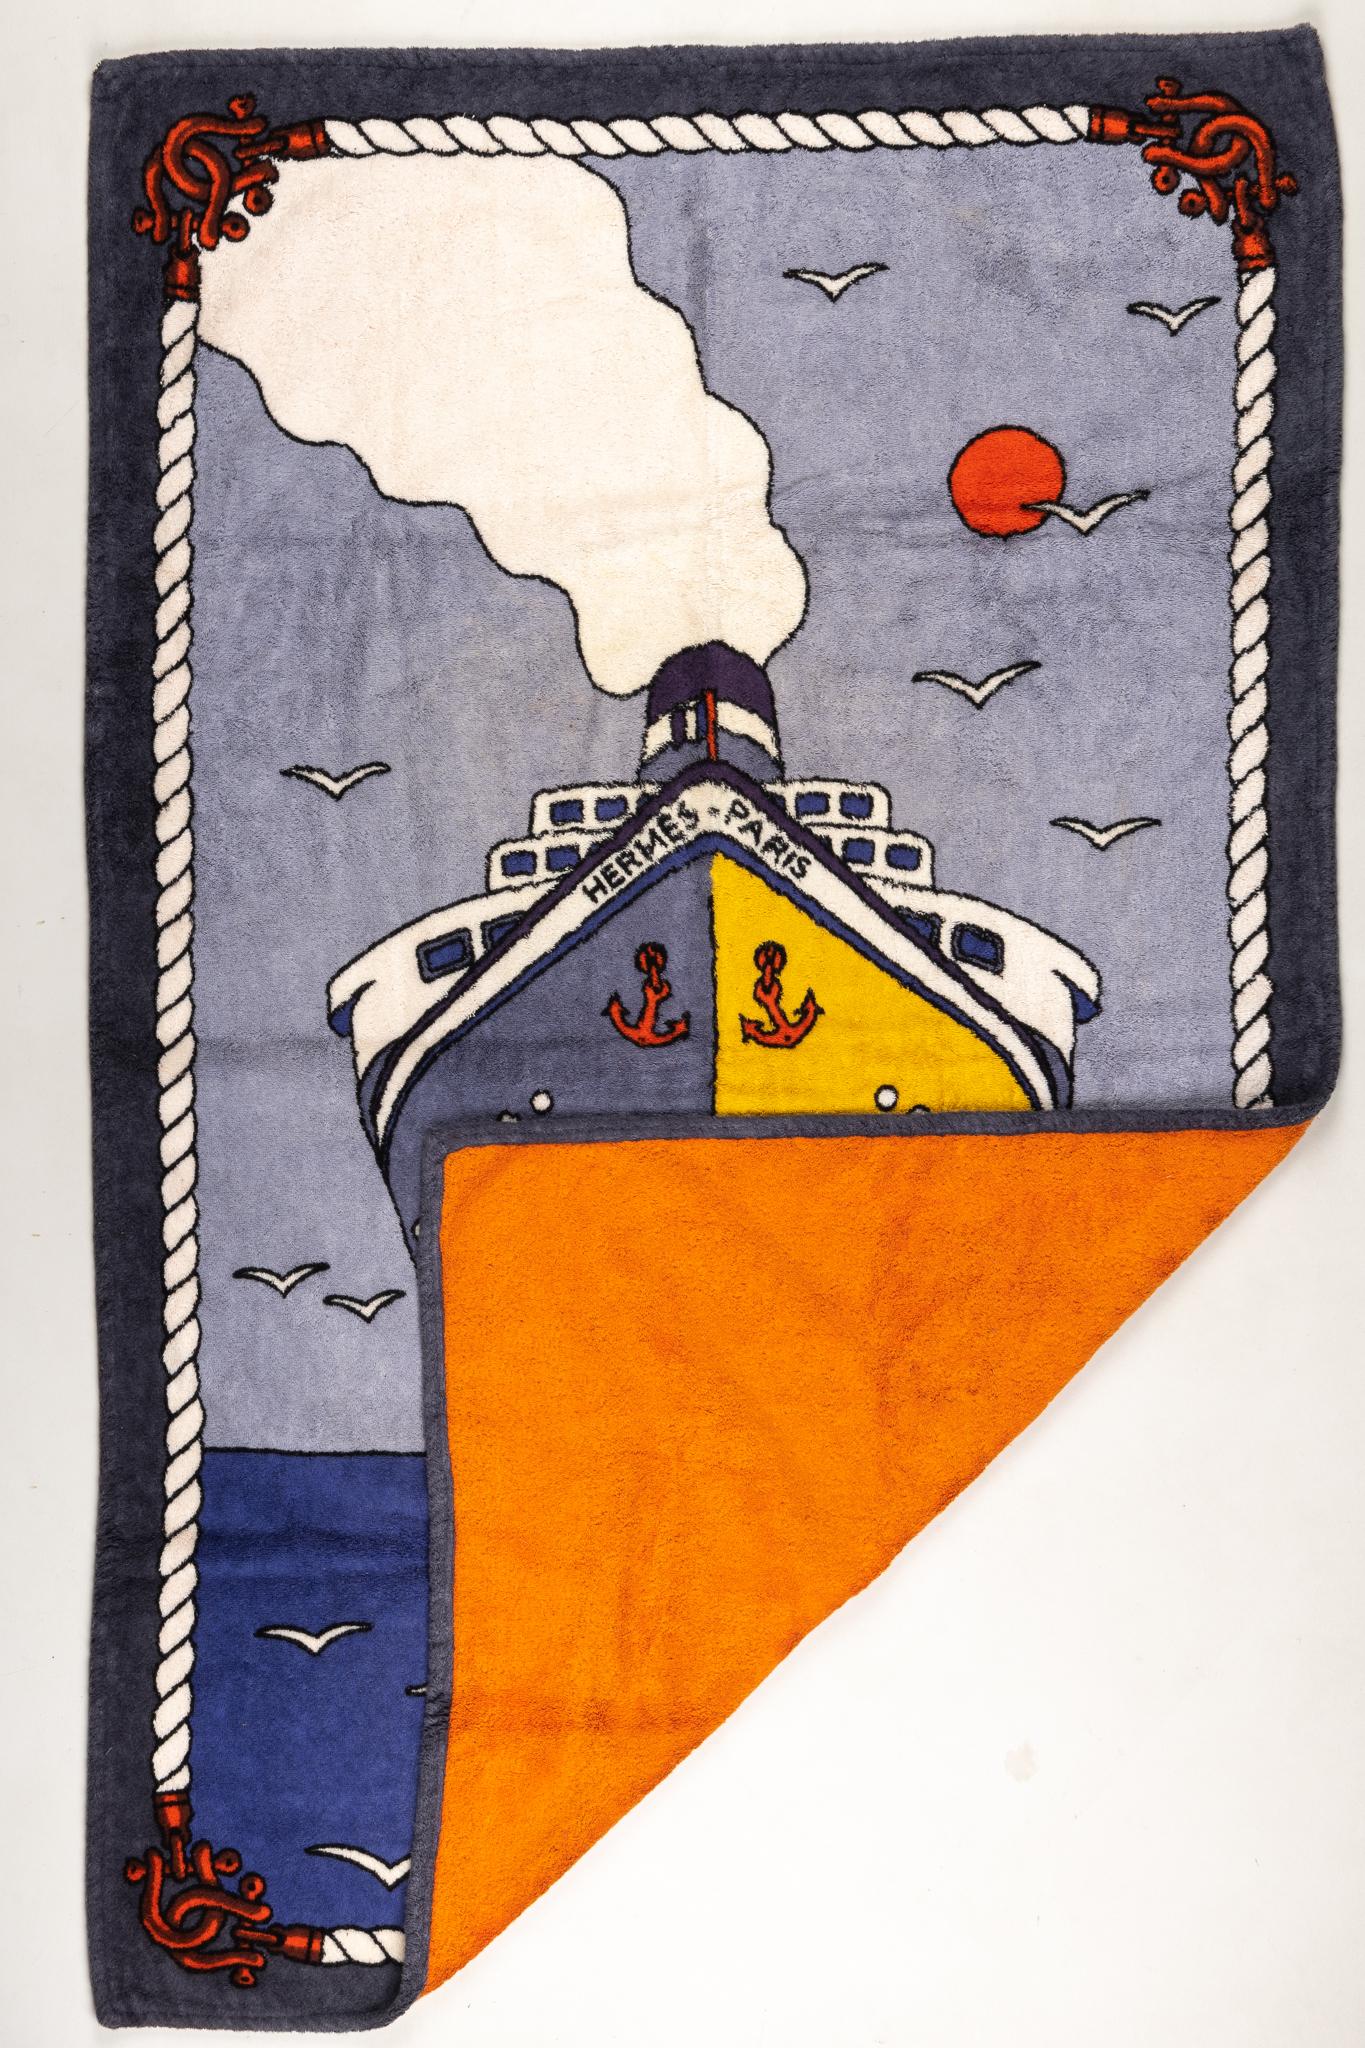 Hermes 90s new condition very collectible beach towel. 100% cotton terry cloth with ship design.